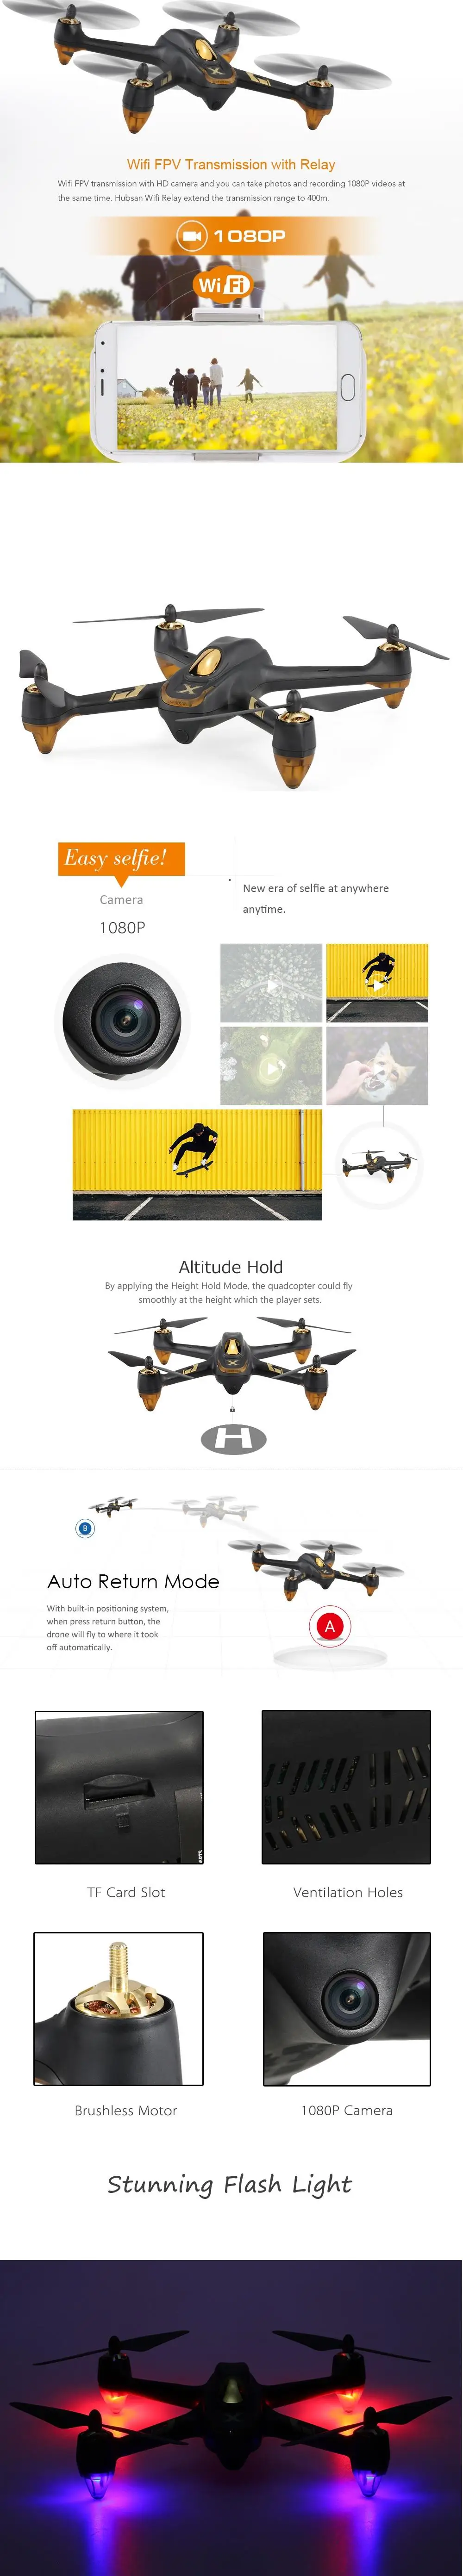 Decimal signature Everyone Hubsan H501a X4 Air Pro Rc Drone With Long Range Hd Camera 1080p  Professional Gps Fpv Brushless Motor Quadcopter Follow Me Mode - Buy Drones  Professional Long Distance,Auto Follow Drone,Follow Me Drone